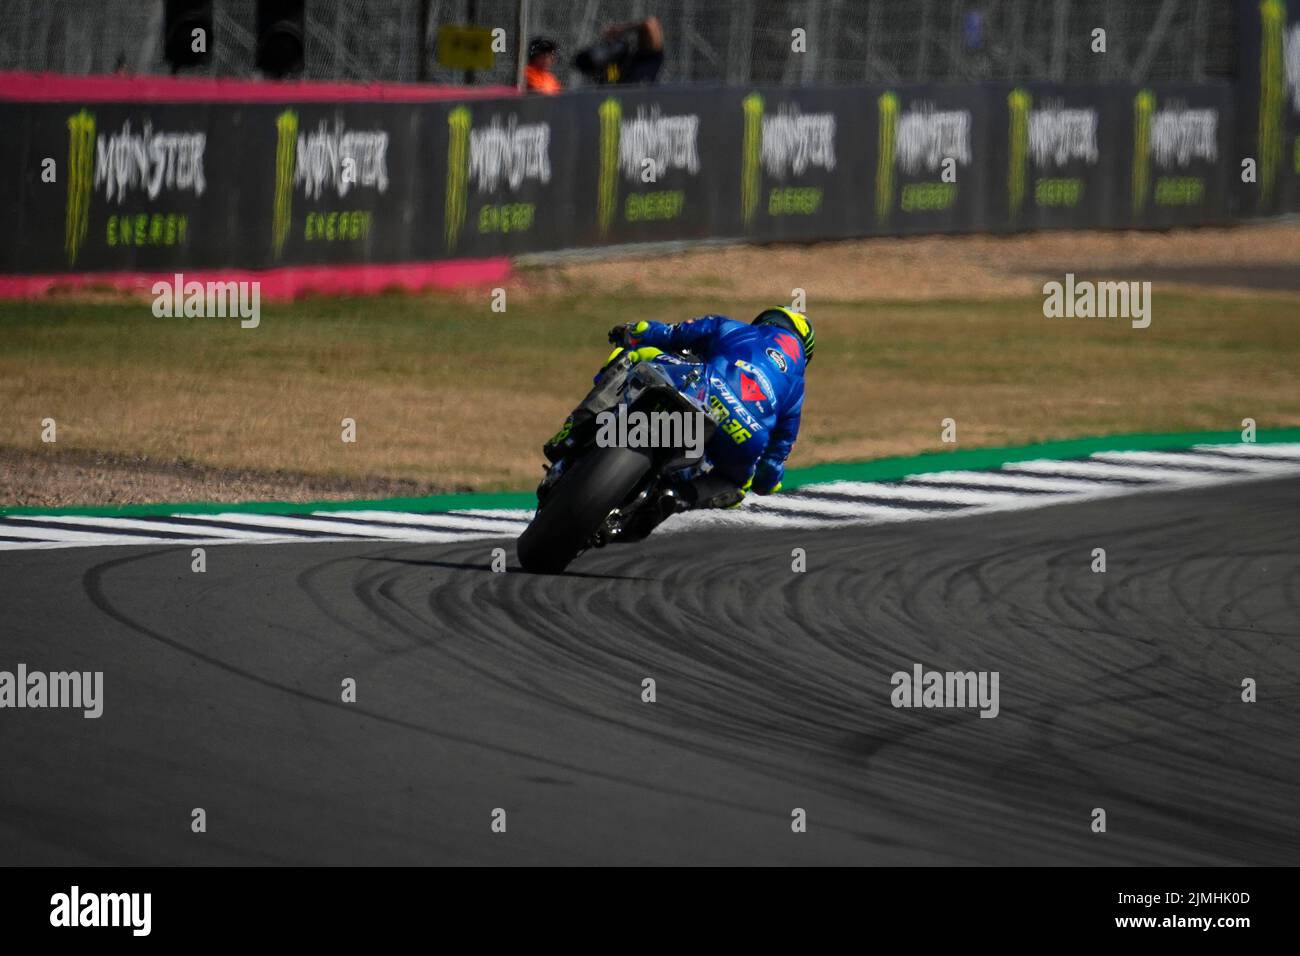 Silverstone, UK. 06th Aug, 2022. Qualifying for MotoGP Monster Energy British Grand Prix at Silverstone Circuit. August 06, 2022 In picture: Spain Joan Mir Clasificacion del Gran Premio Monster Energy de MotoGP de Gran Bretaña en el Circuito de Silverstone, 06 de Agosto de 2022 POOL/ MotoGP.com/Cordon Press Images will be for editorial use only. Mandatory credit: © MotoGP.com Credit: CORDON PRESS/Alamy Live News Stock Photo